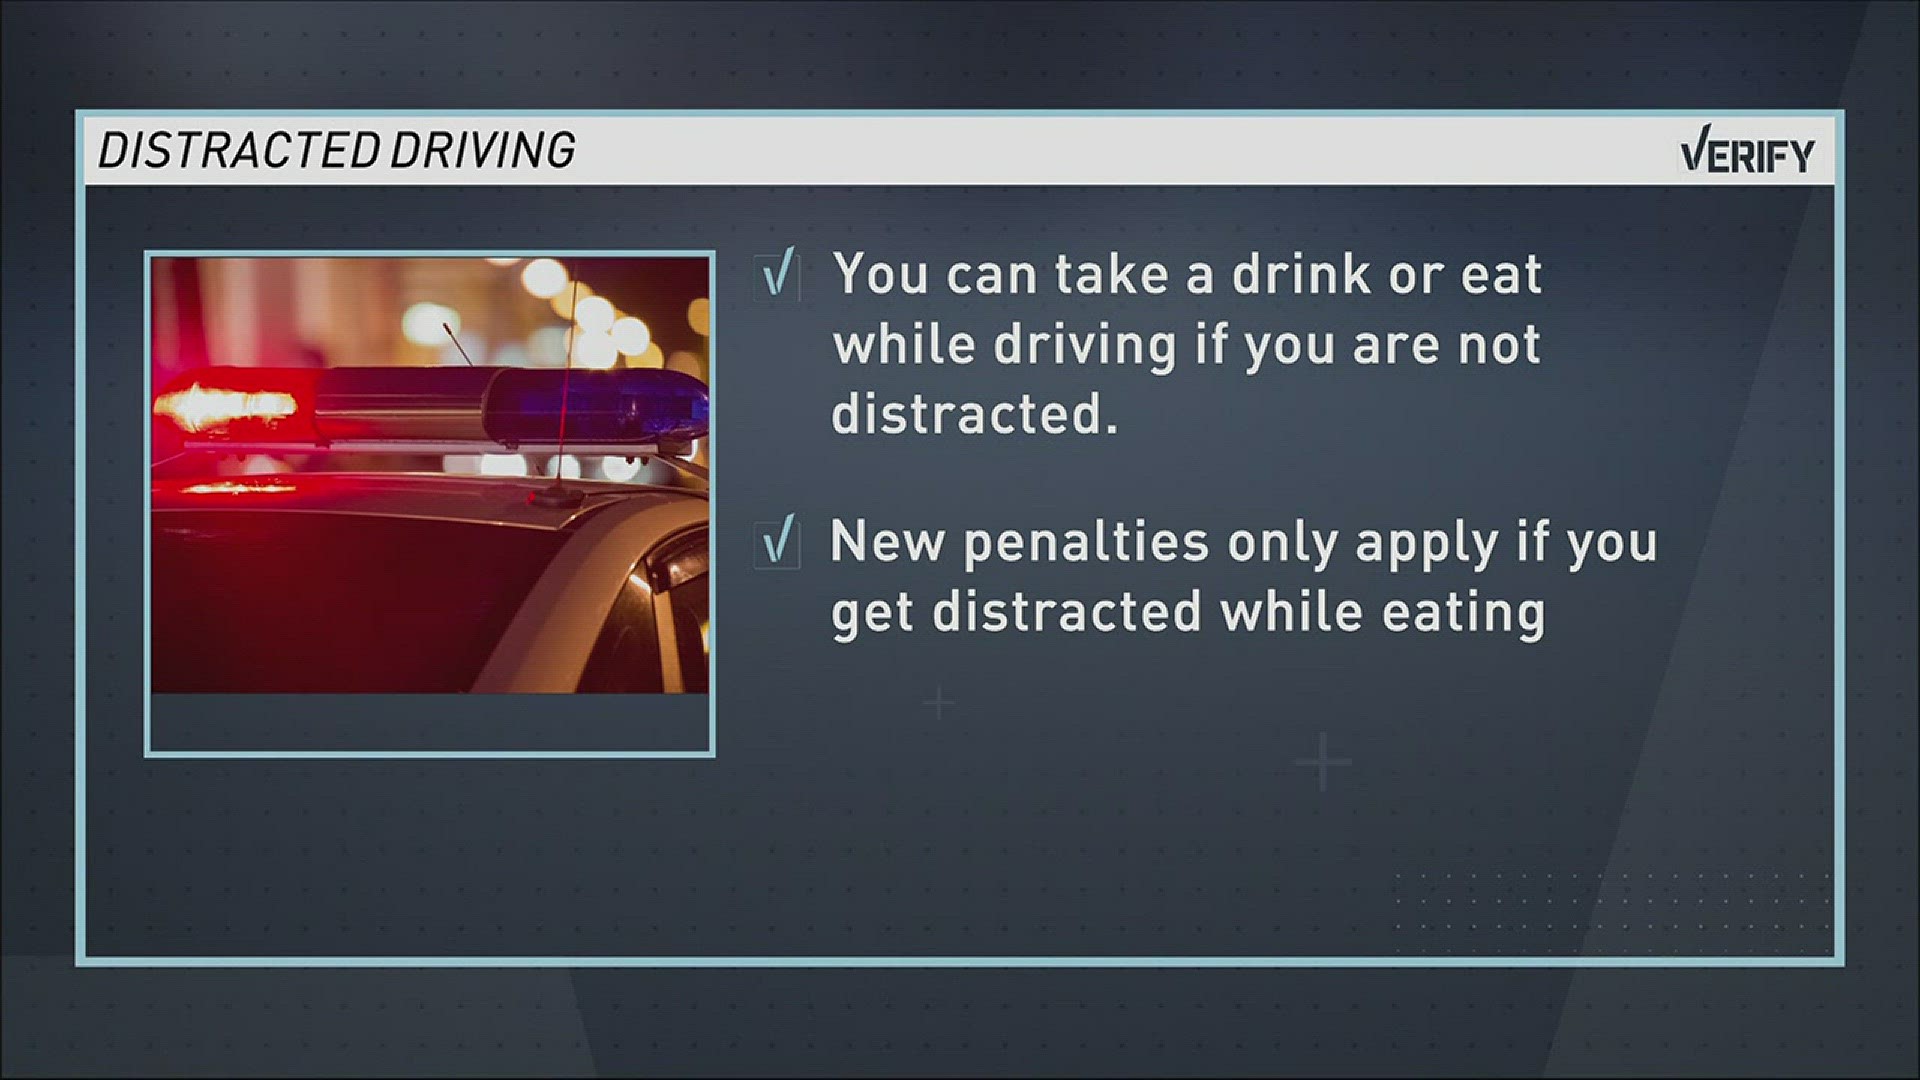 KGW's Verify team on whether it is legal to eat or drink while driving under Washington's new distracted driving law. July 26, 2017